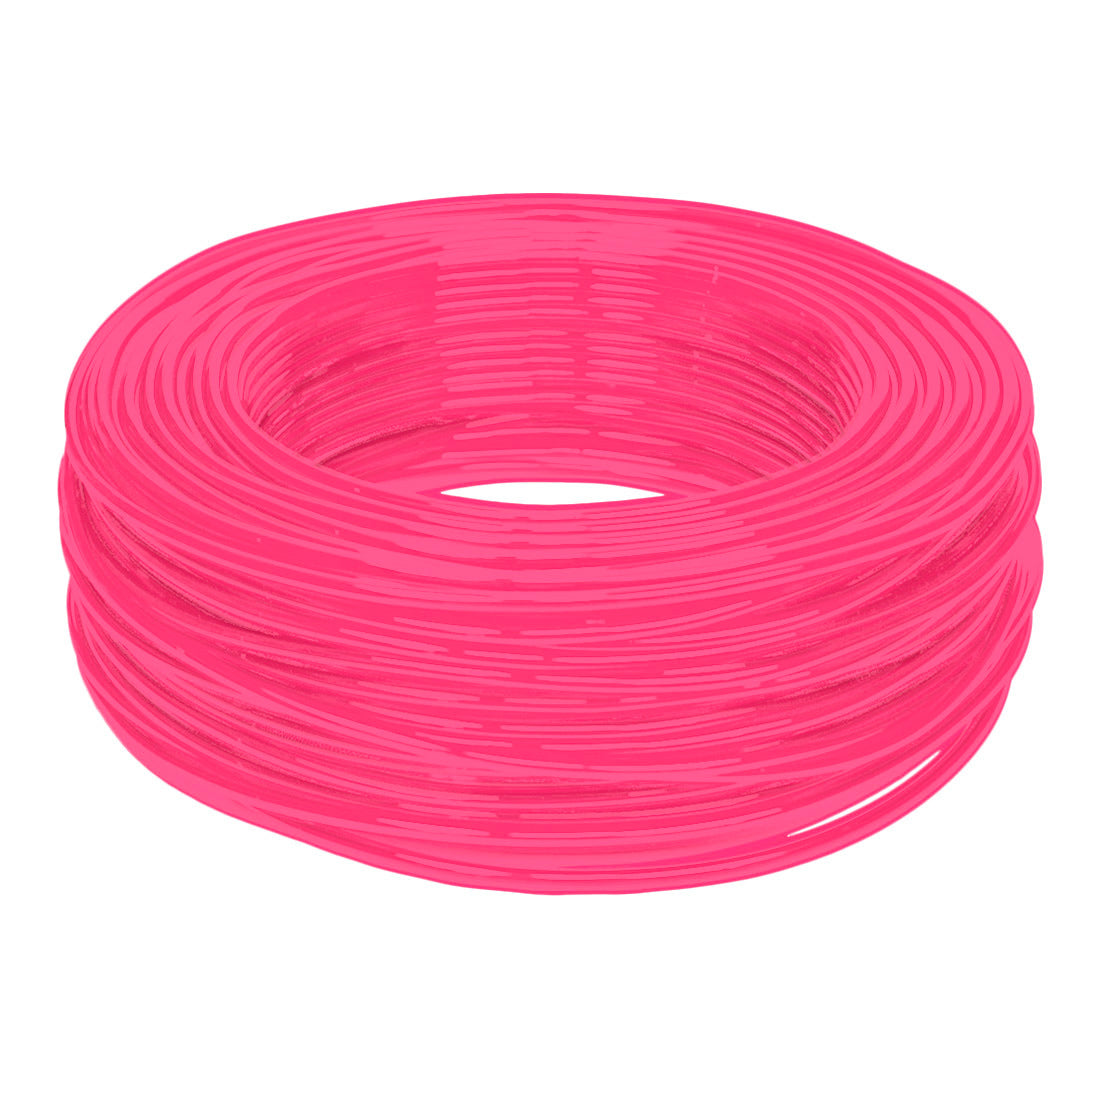 XERO Hose Pink Product View